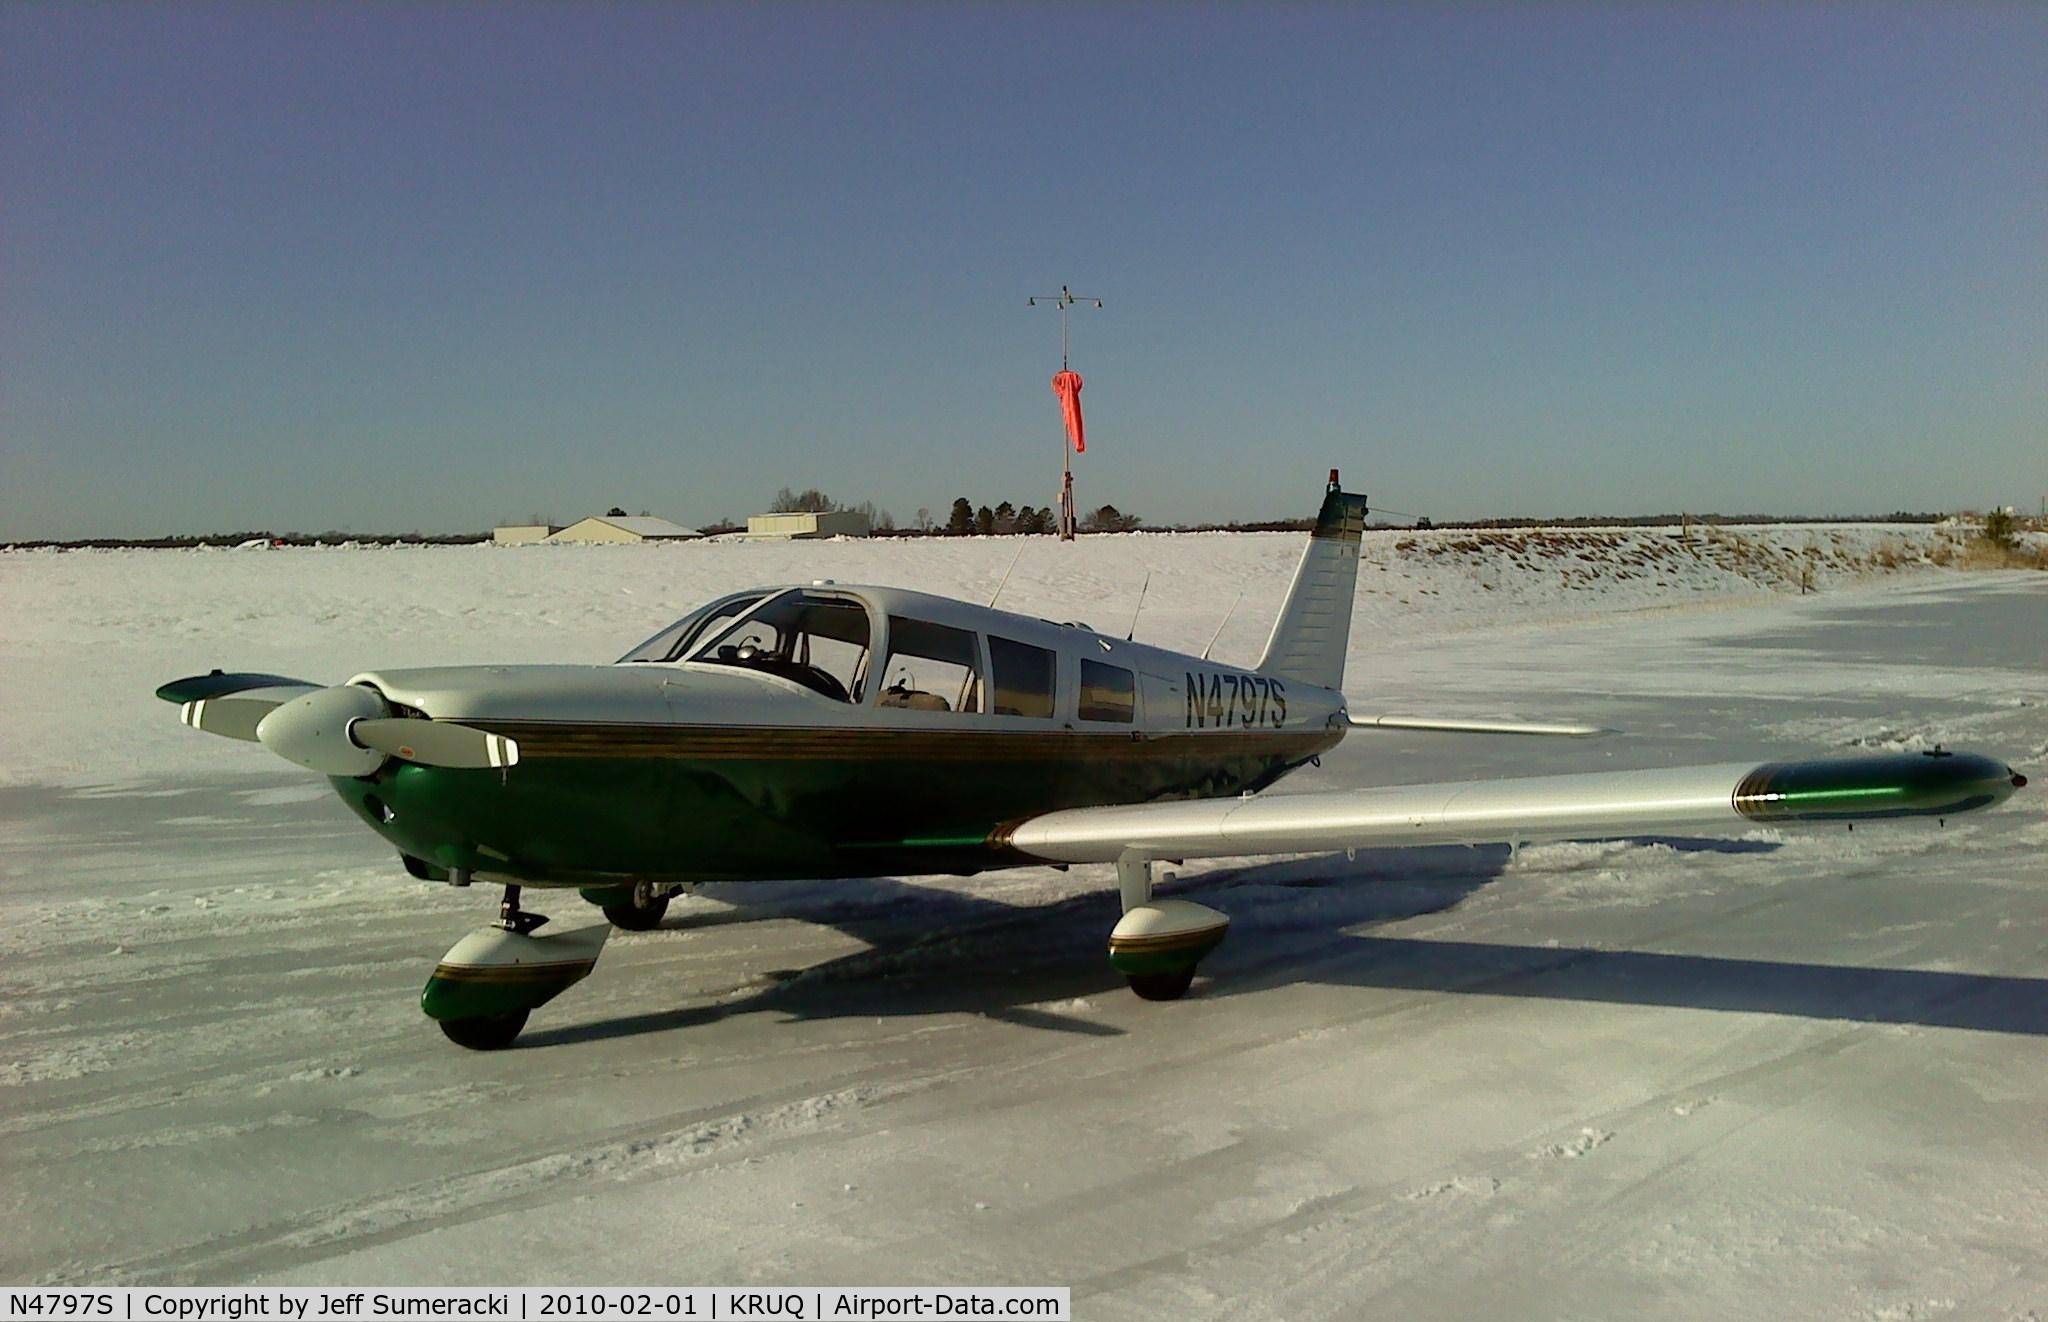 N4797S, 1969 Piper PA-32-260 Cherokee Six C/N 32-1182, Taxi practice on ice at KRUQ, runway closed at the time.